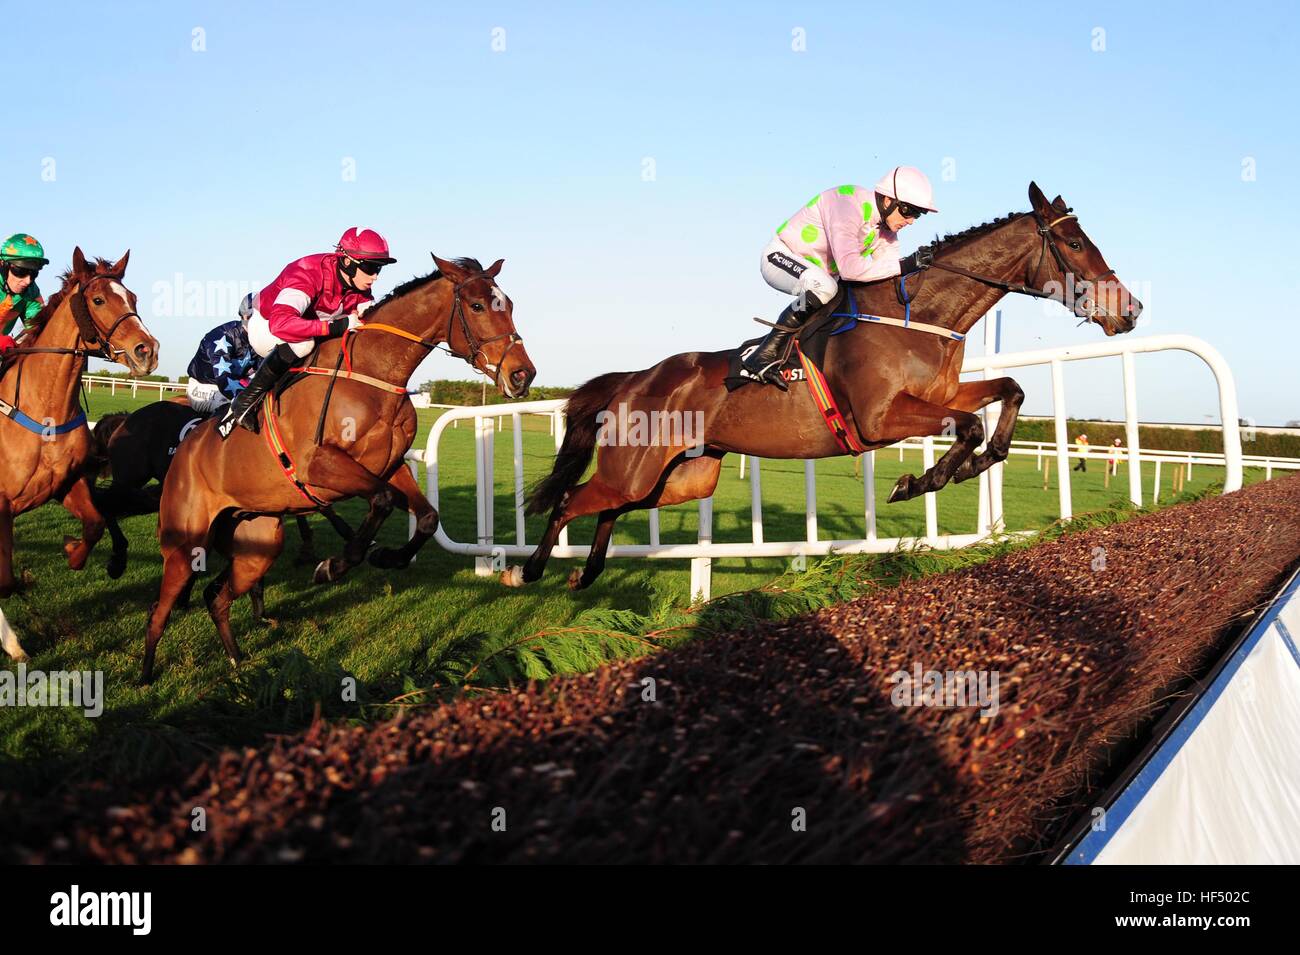 Min and jockey Ruby Walsh go on to win the Racing Post Novice Chase during day one of the Christmas Festival at Leopardstown Racecourse. PRESS ASSOCIATION Photo. Picture date: Monday December 26, 2016. See PA story RACING Leopardstown. Photo credit should read: PA Wire.during day one of the Christmas Festival at Leopardstown Racecourse. PRESS ASSOCIATION Photo. Picture date: Monday December 26, 2016. See PA story RACING Leopardstown. Photo credit should read: PA Wire. Stock Photo